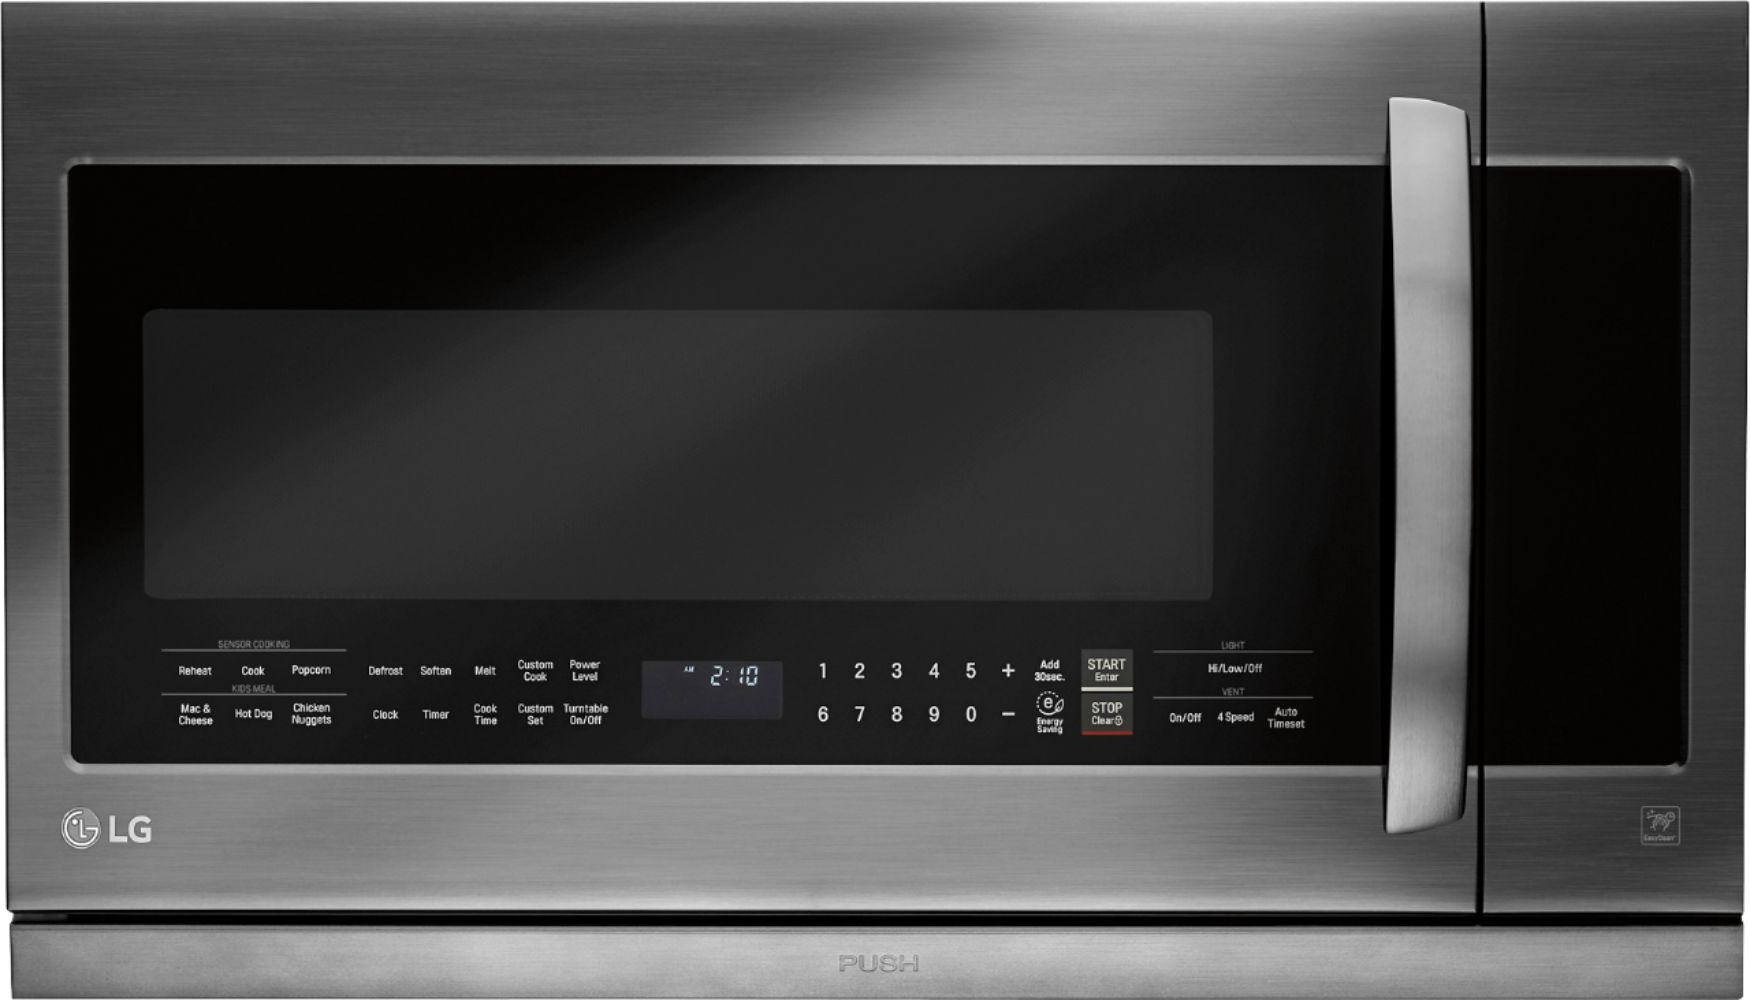 Lg 22 Cu Ft Extendavent 20 Over The Range Microwave With Sensor Cooking Printproof Black Stainless Steel in dimensions 1750 X 1000